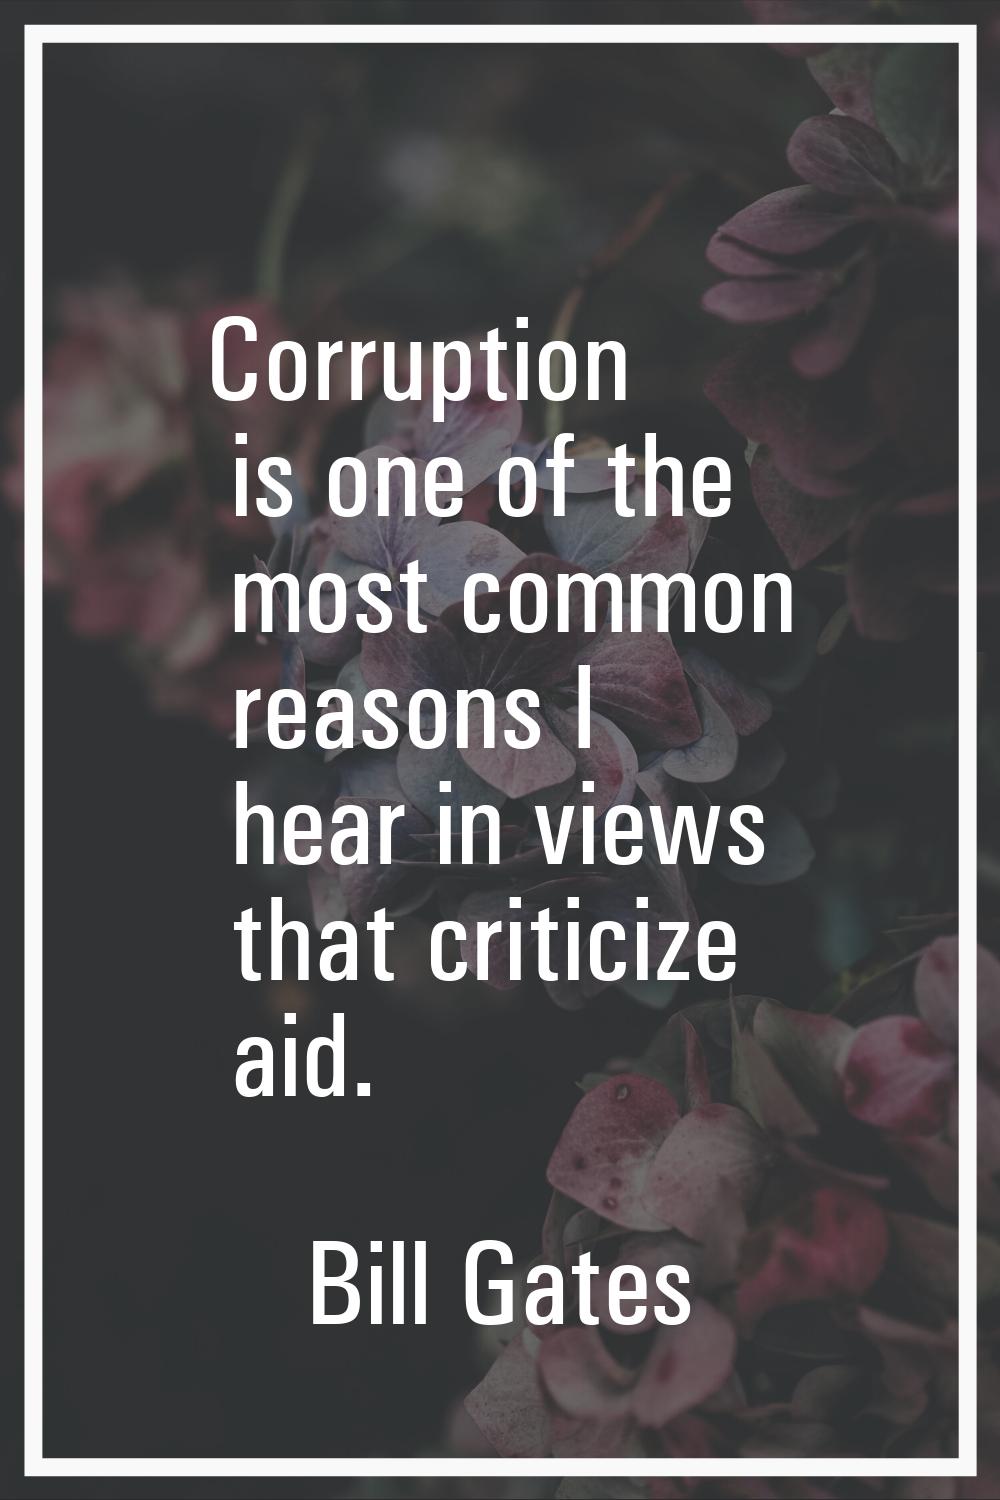 Corruption is one of the most common reasons I hear in views that criticize aid.